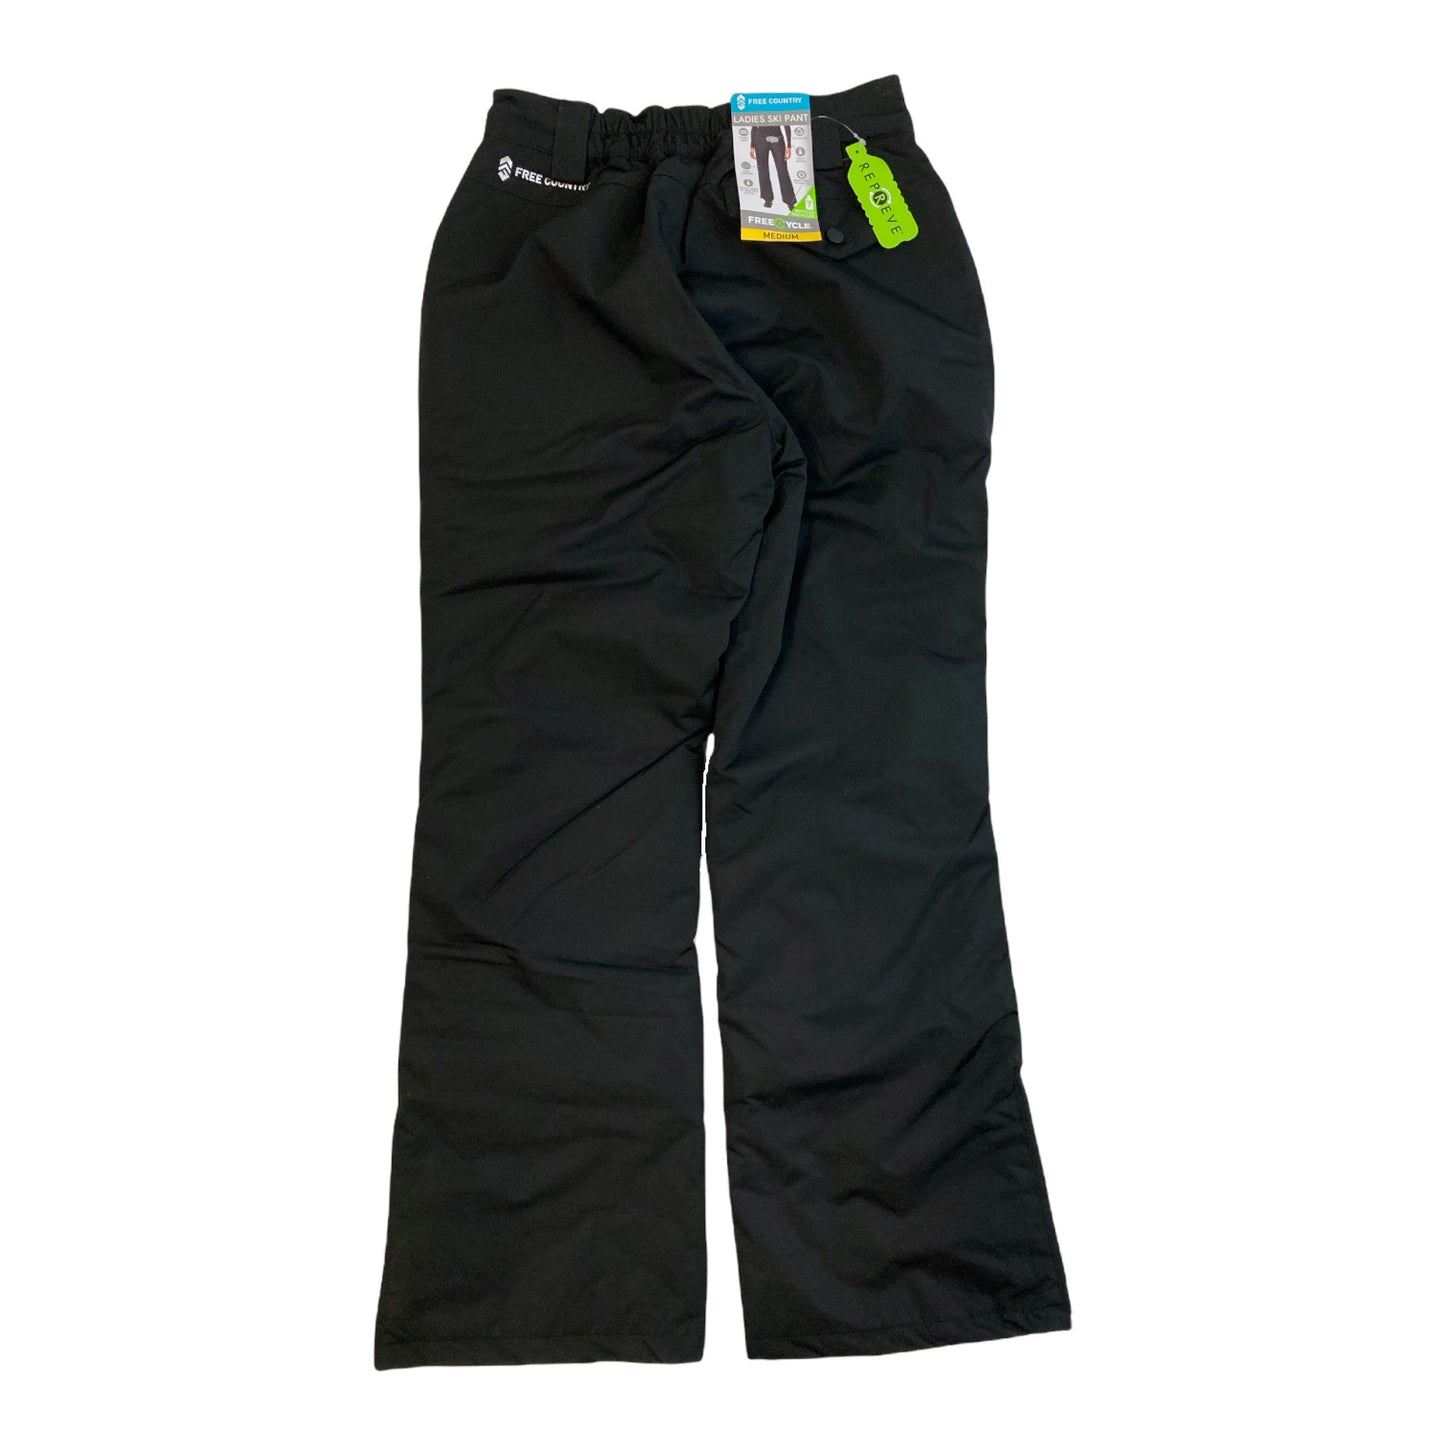 Free Country Women's Water & Wind Resistant Insulated Ski Pant